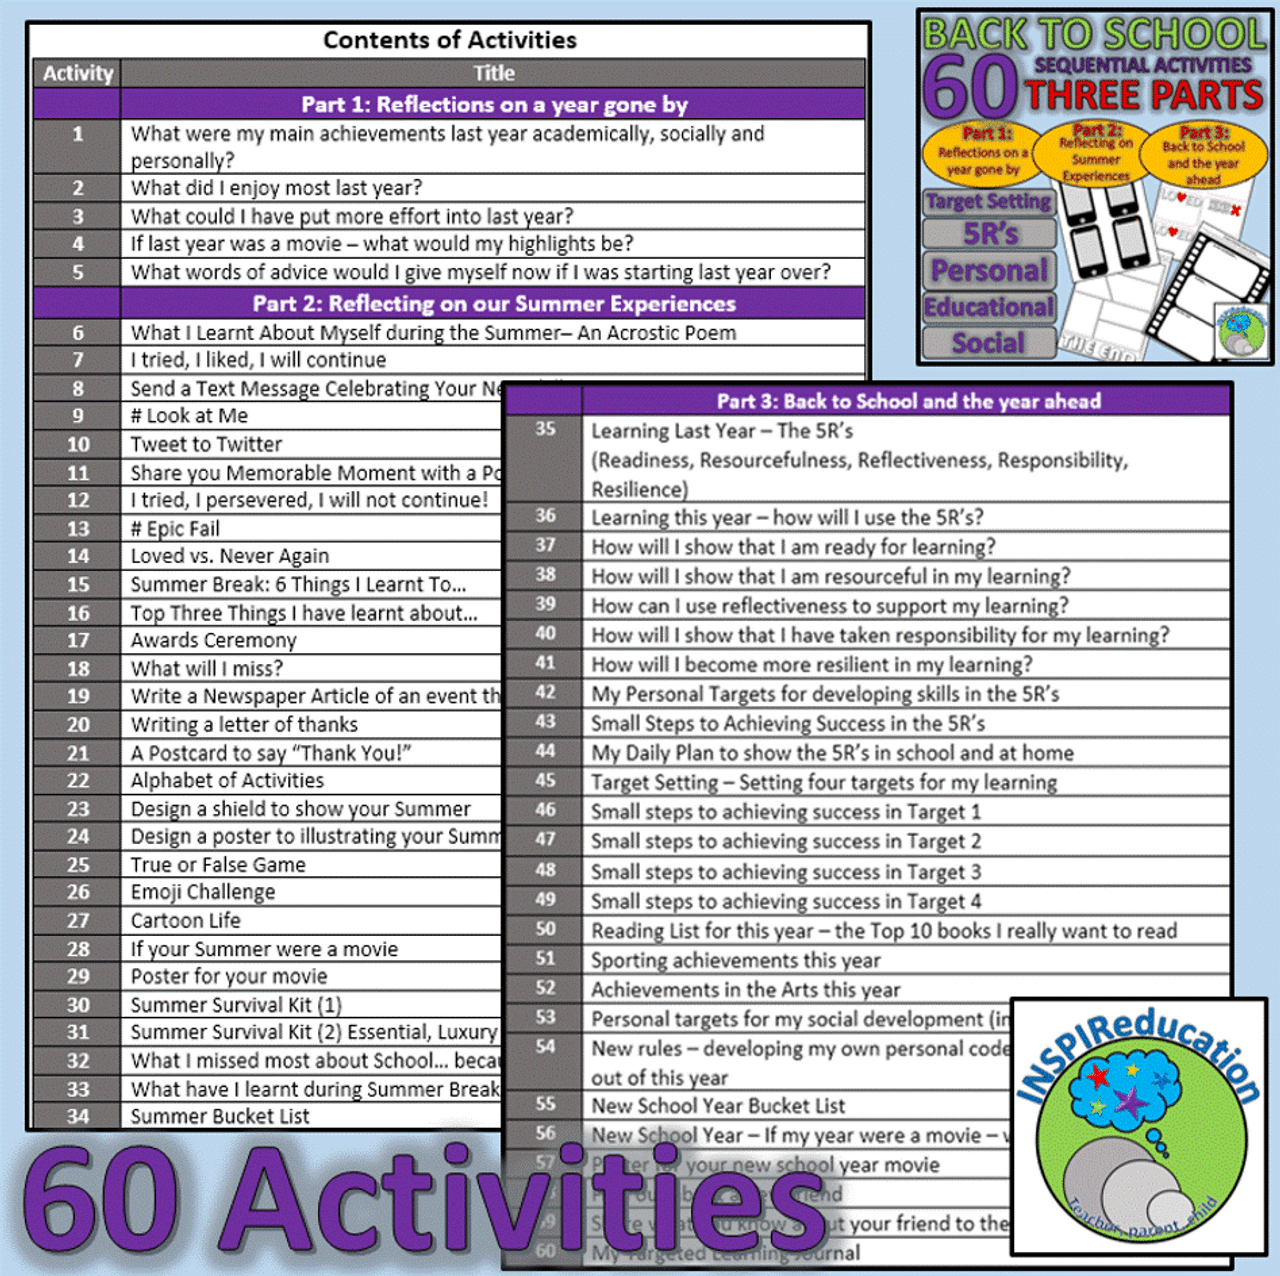 BACK TO SCHOOL ACTIVITY PACK: 60 Activities, Reflection, Target Setting, Engagement, Get to know students and staff